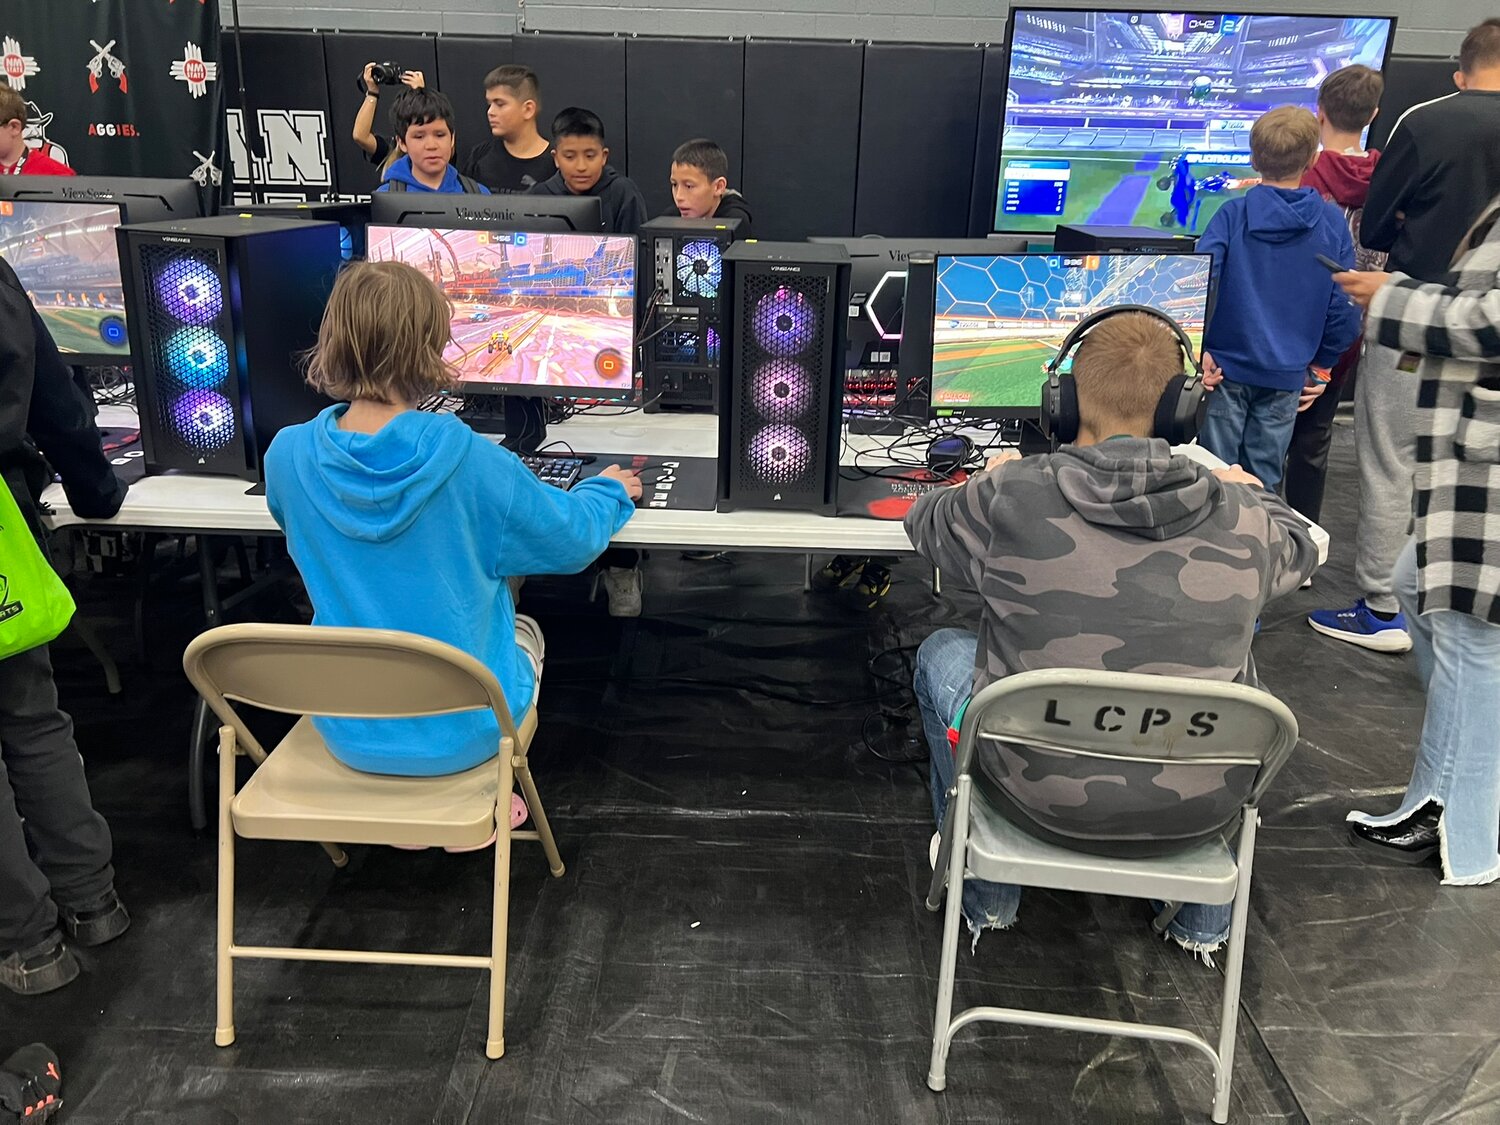 Students from across the school district participate in the LCPS Roadrunner Rally Esports Showcase Nov. 30 at Organ Mountain High School.